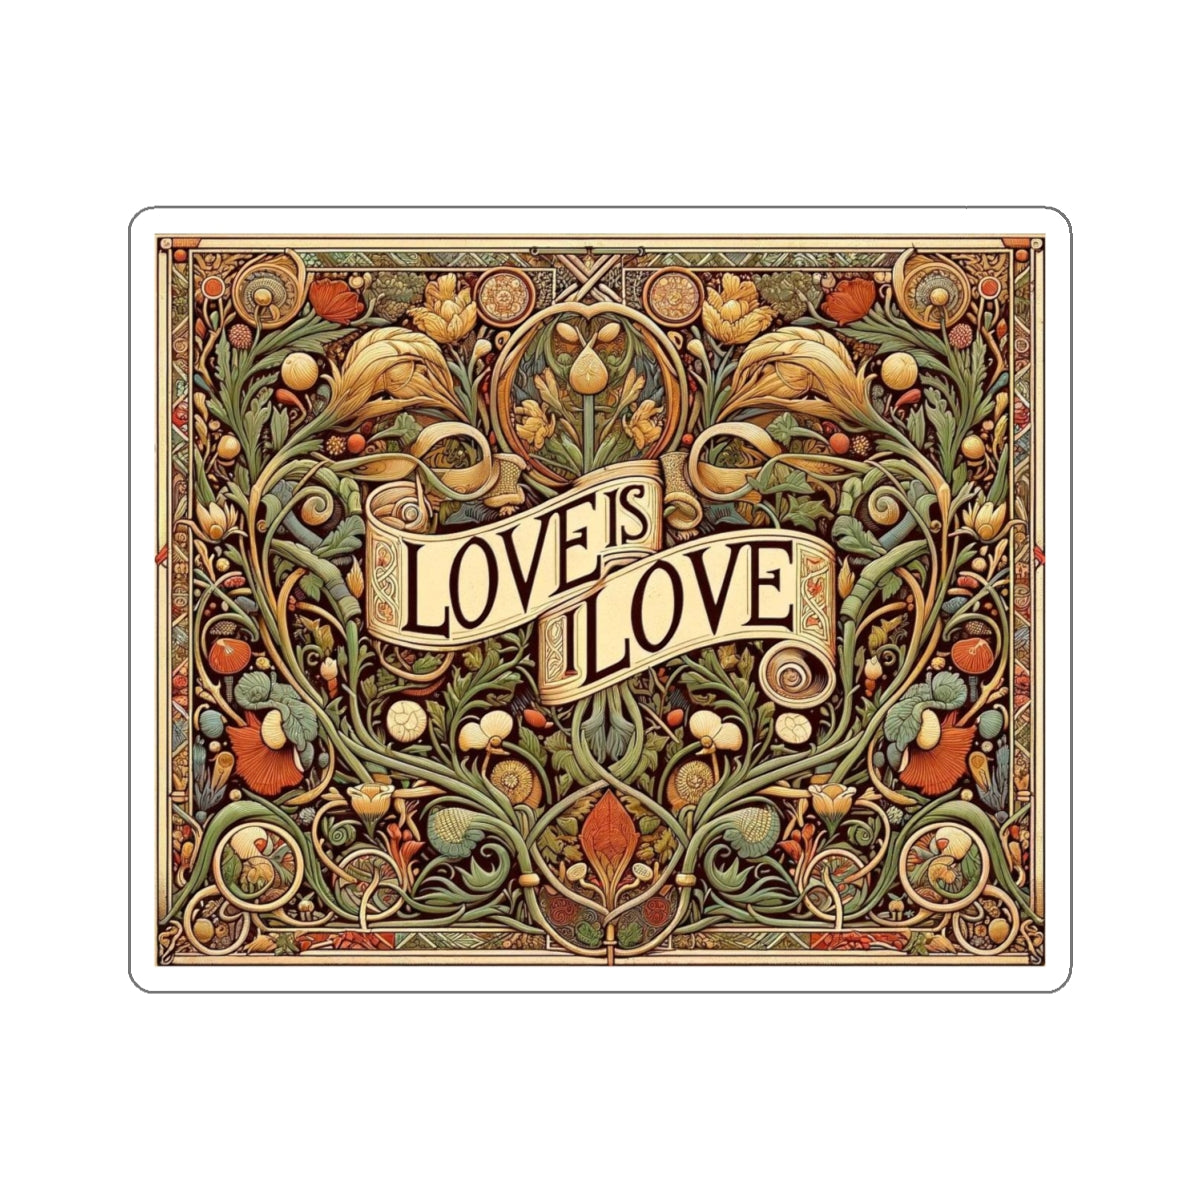 Bold Statement vinyl Sticker/Decal: Love is Love! for laptop, kindle, phone, ipad, instrument case, notebook, mood board, or wall